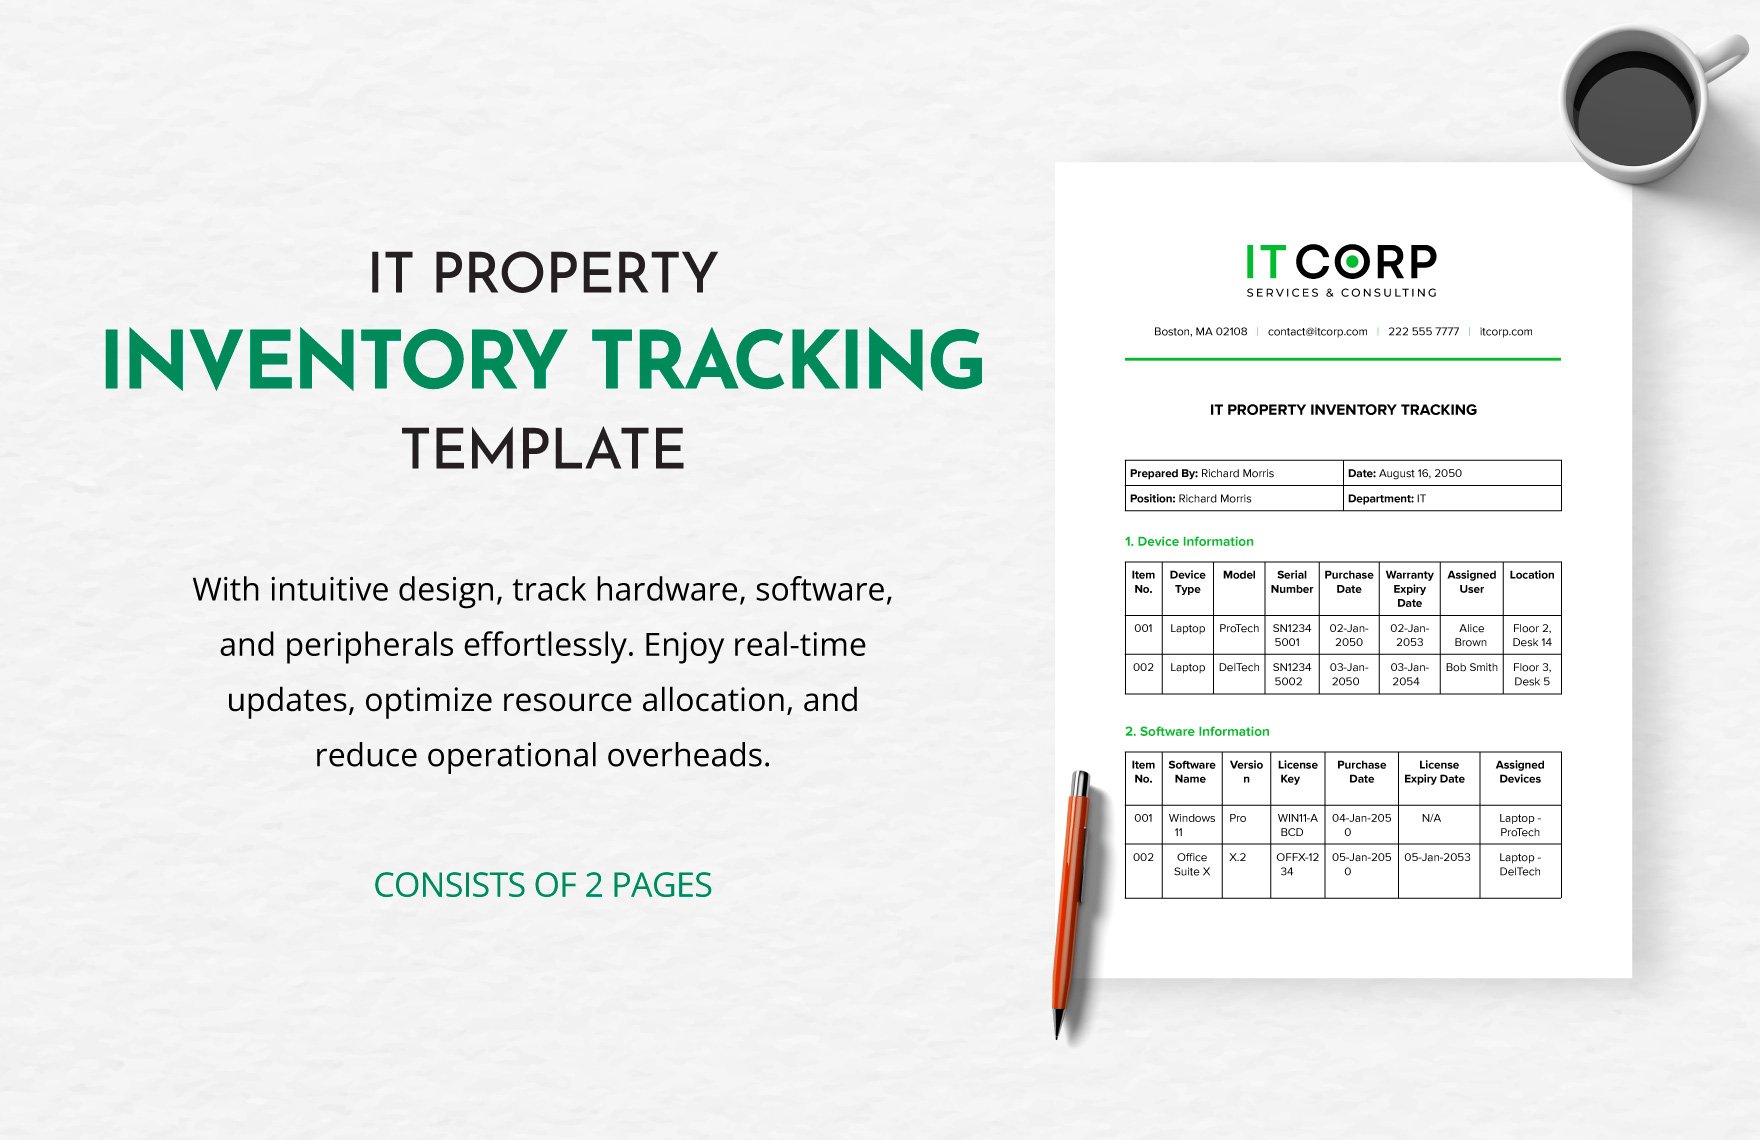 IT Property Inventory Tracking Template